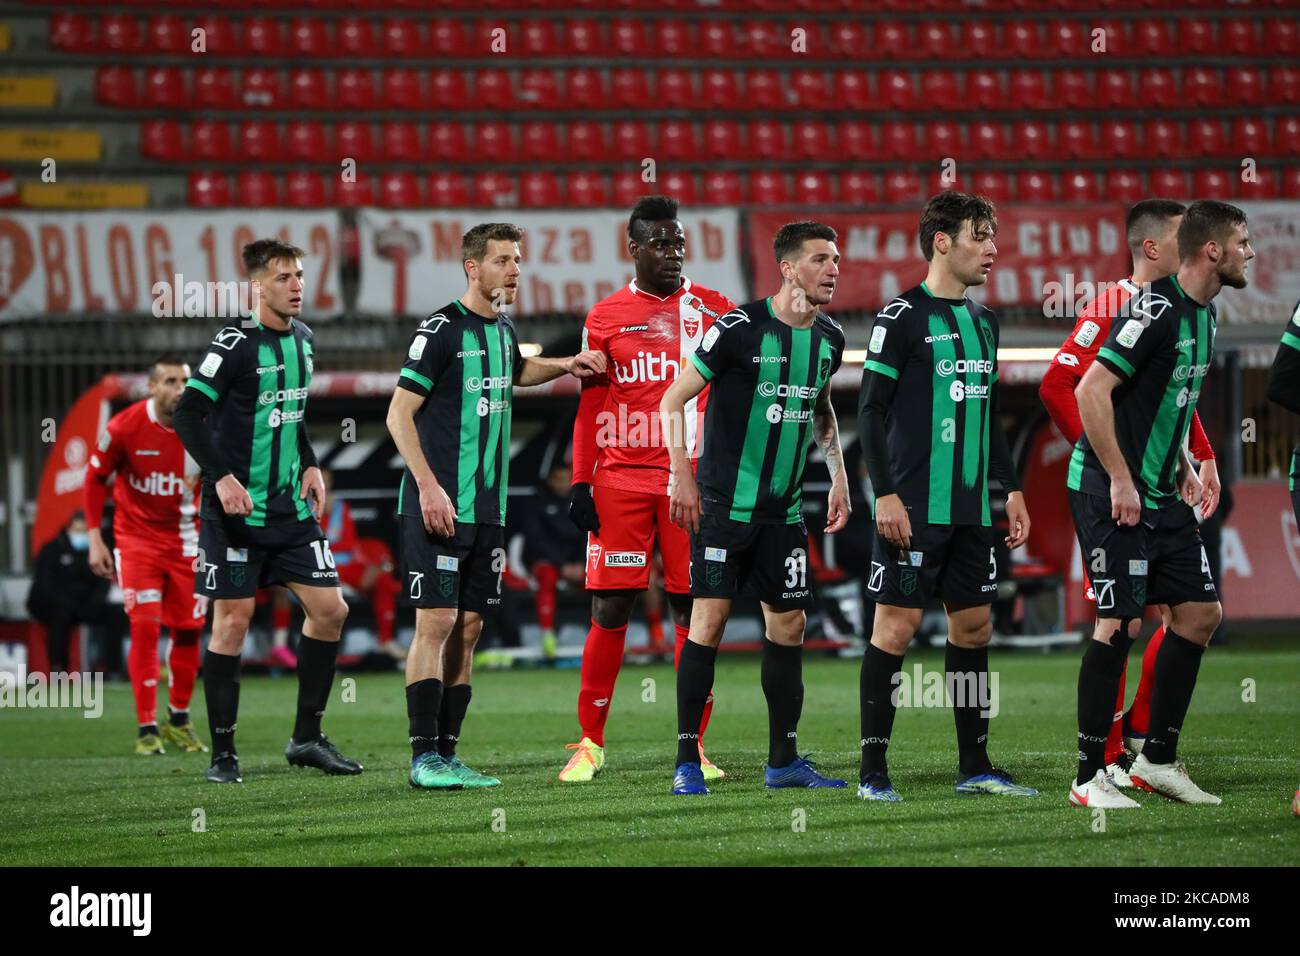 Mario Balotelli of AC Monza in action during the Serie B match between AC Monza and Pordenone Calcio at Stadio Brianteo on March 06, 2021 in Monza, Italy. (Photo by Mairo Cinquetti/NurPhoto) Stock Photo